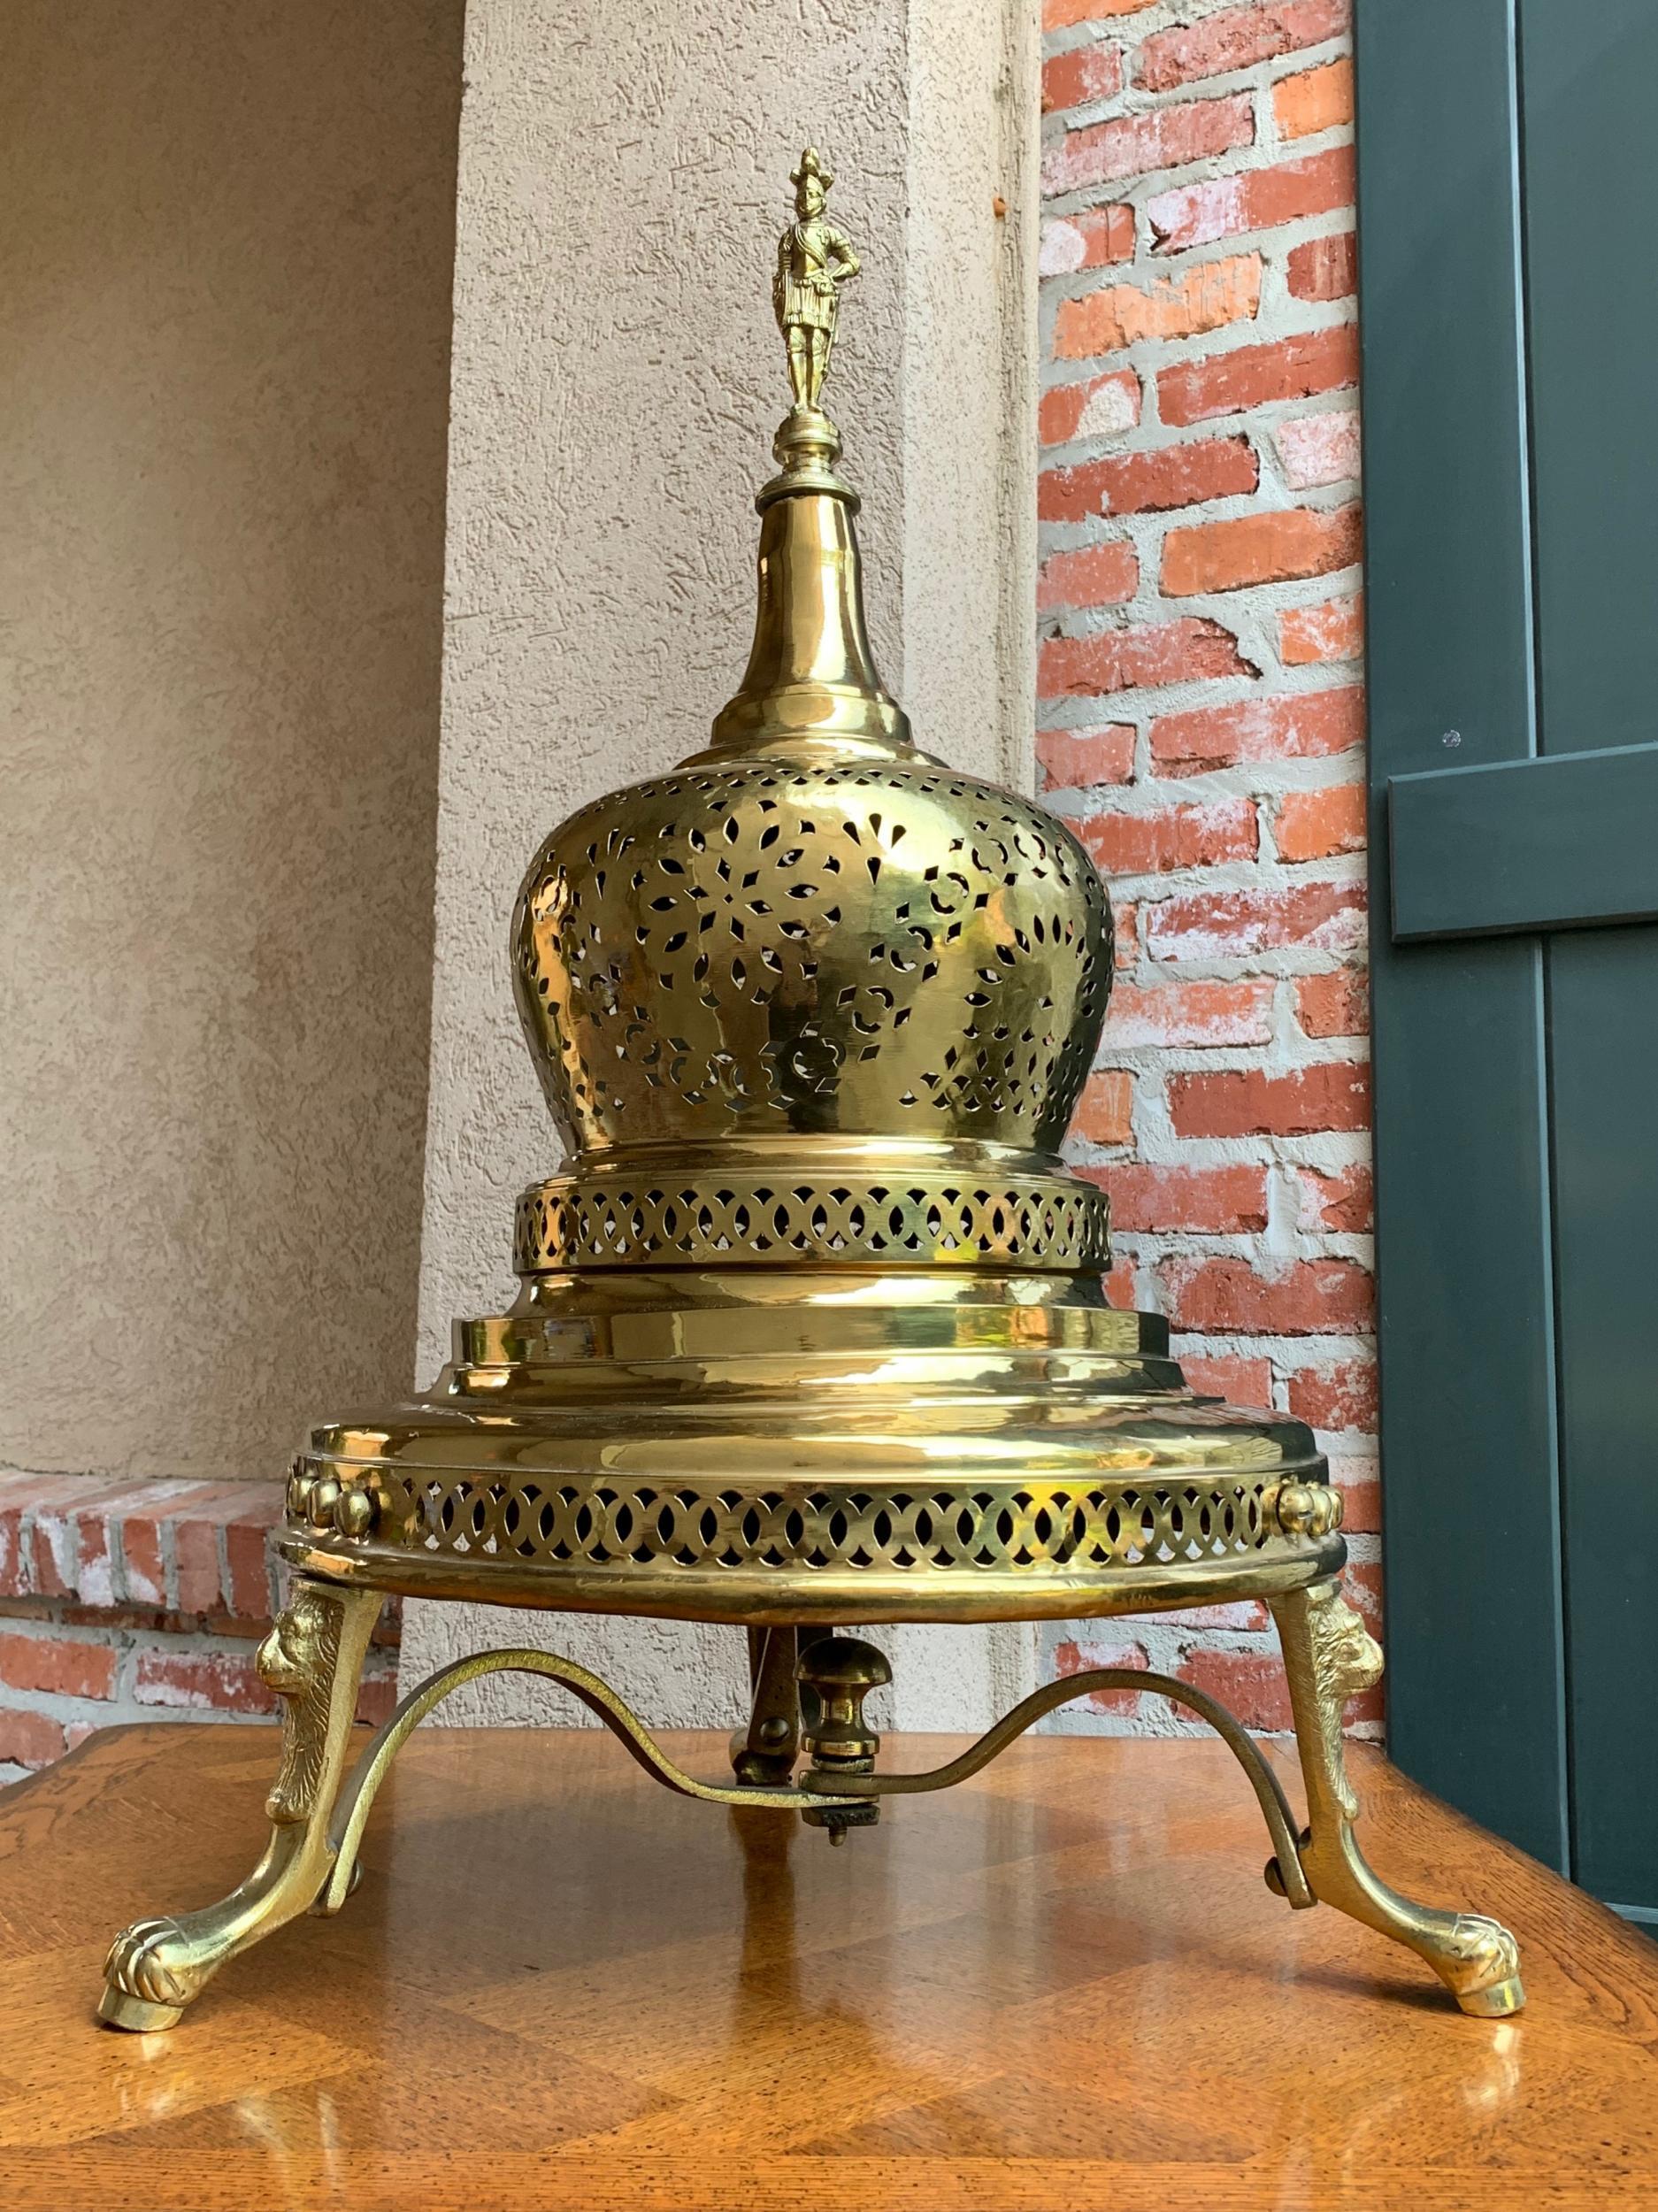 Vintage French polished brass bell brazier heater fire pit incense
 
~Direct from France~
~Gorgeously appointed French brass brazier, from the solider at the top, to the lion paw feet!~
~Very large bell shaped cover is topped with a figural solider